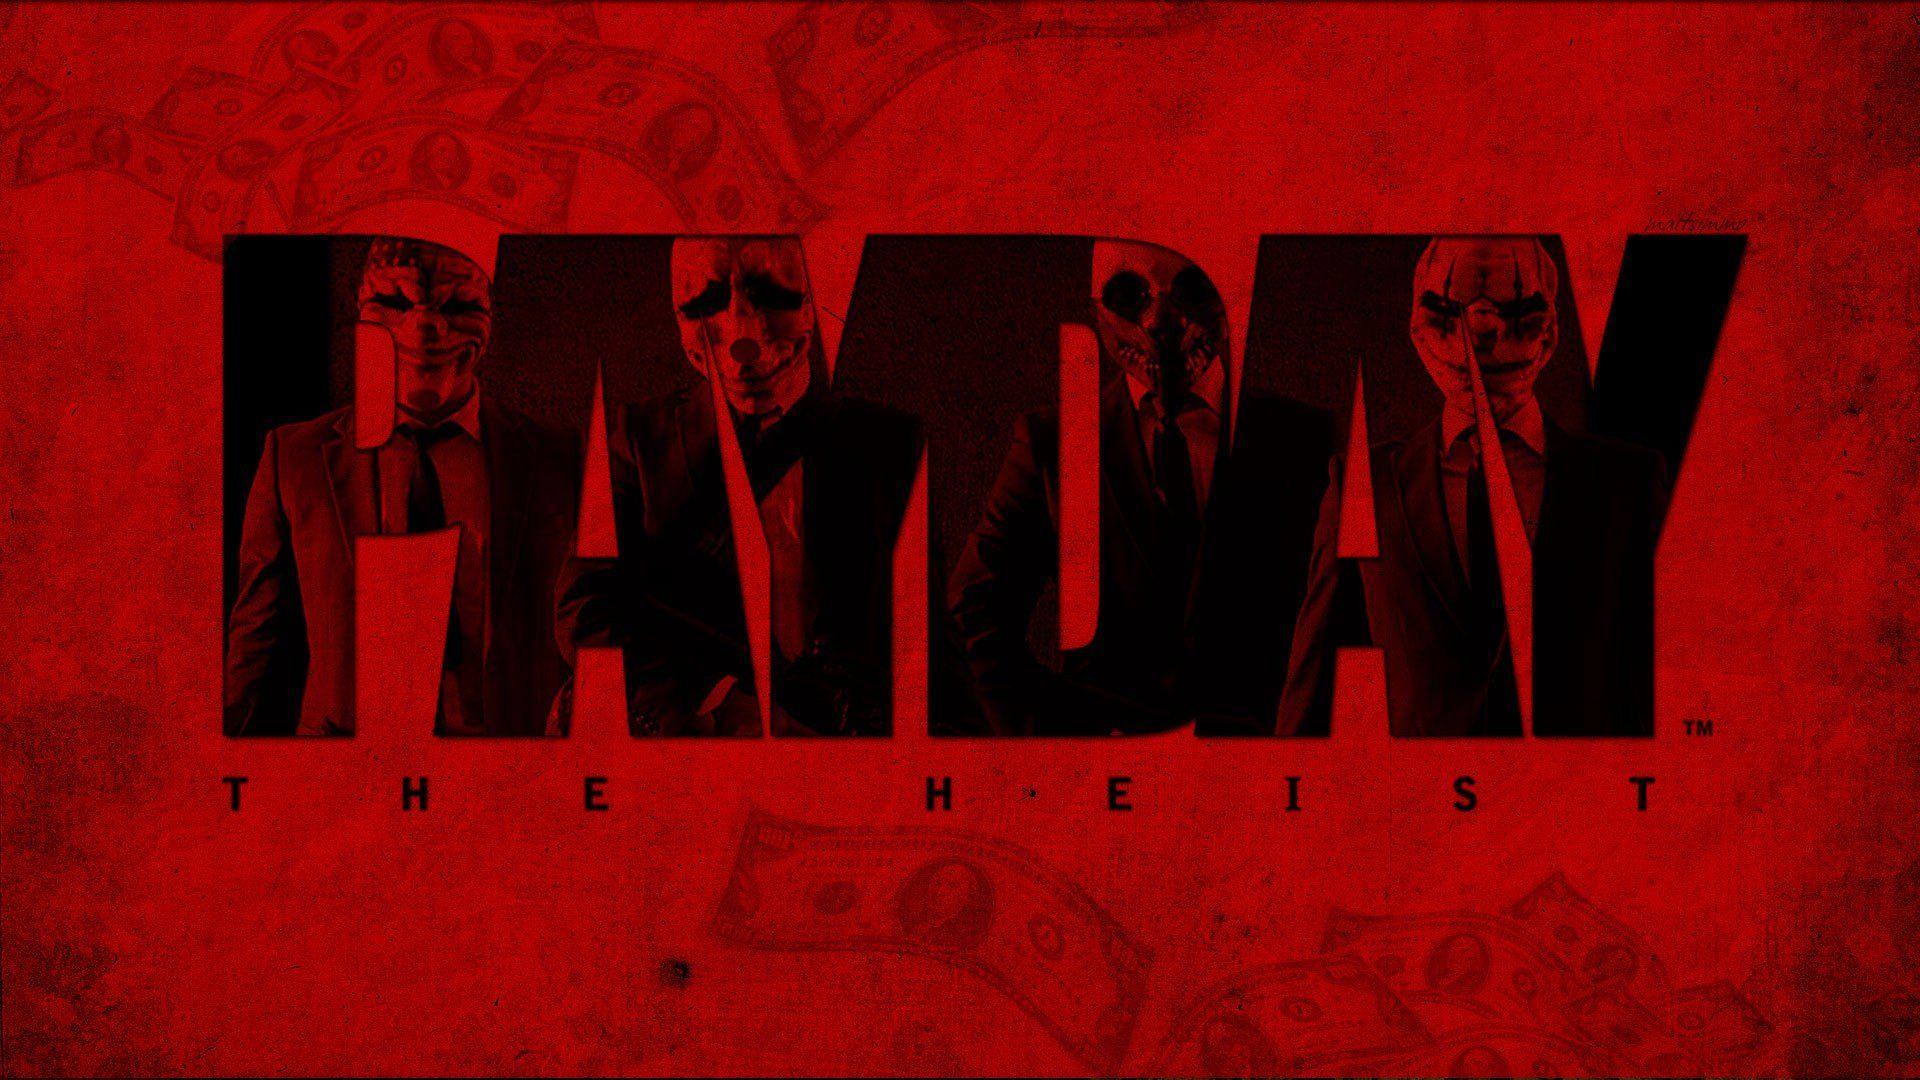 PayDay The Heist wallpaperx1200